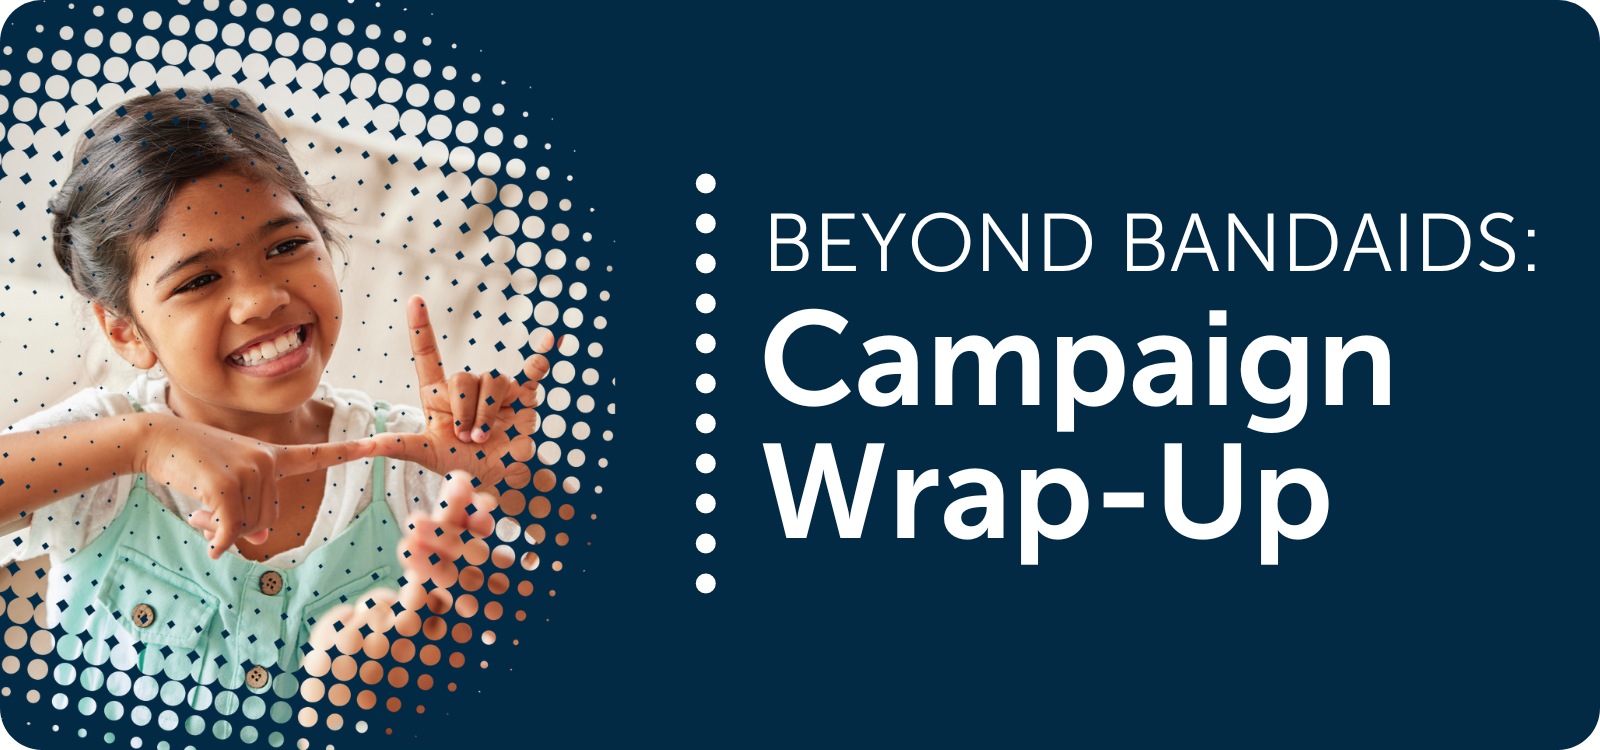 Image tile to download the Beyond Bandaids Executive Summary